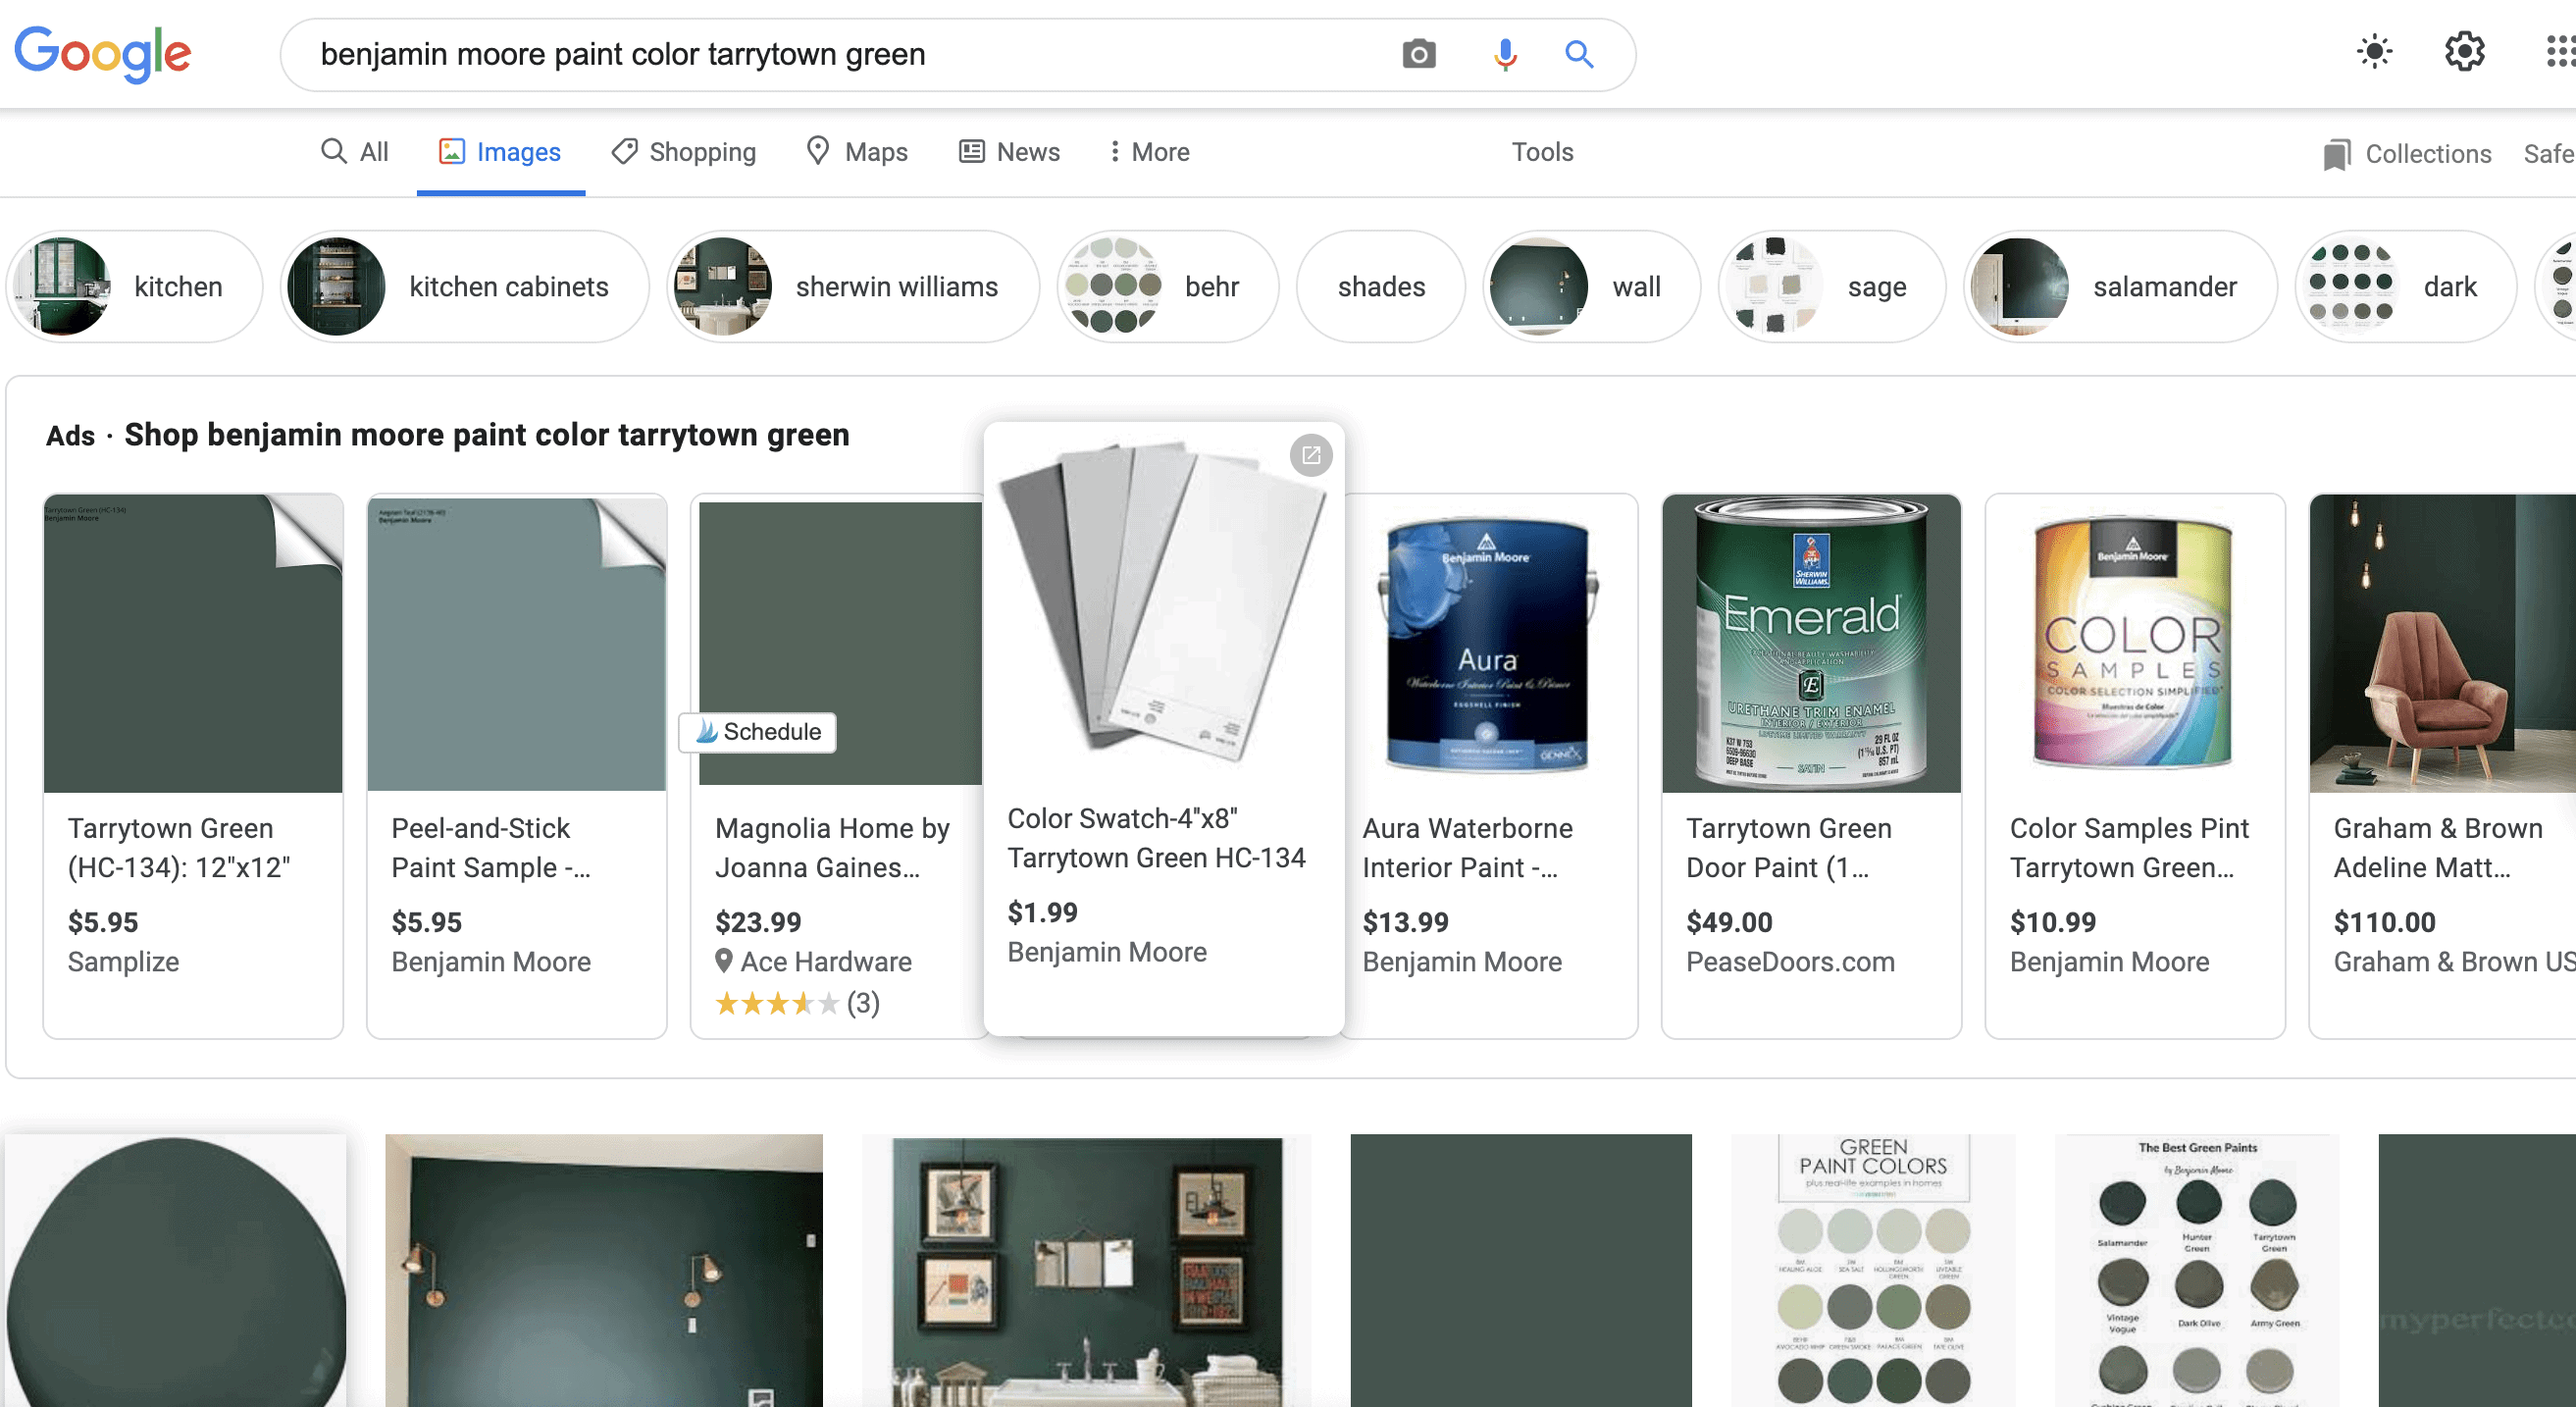 searching for a paint color